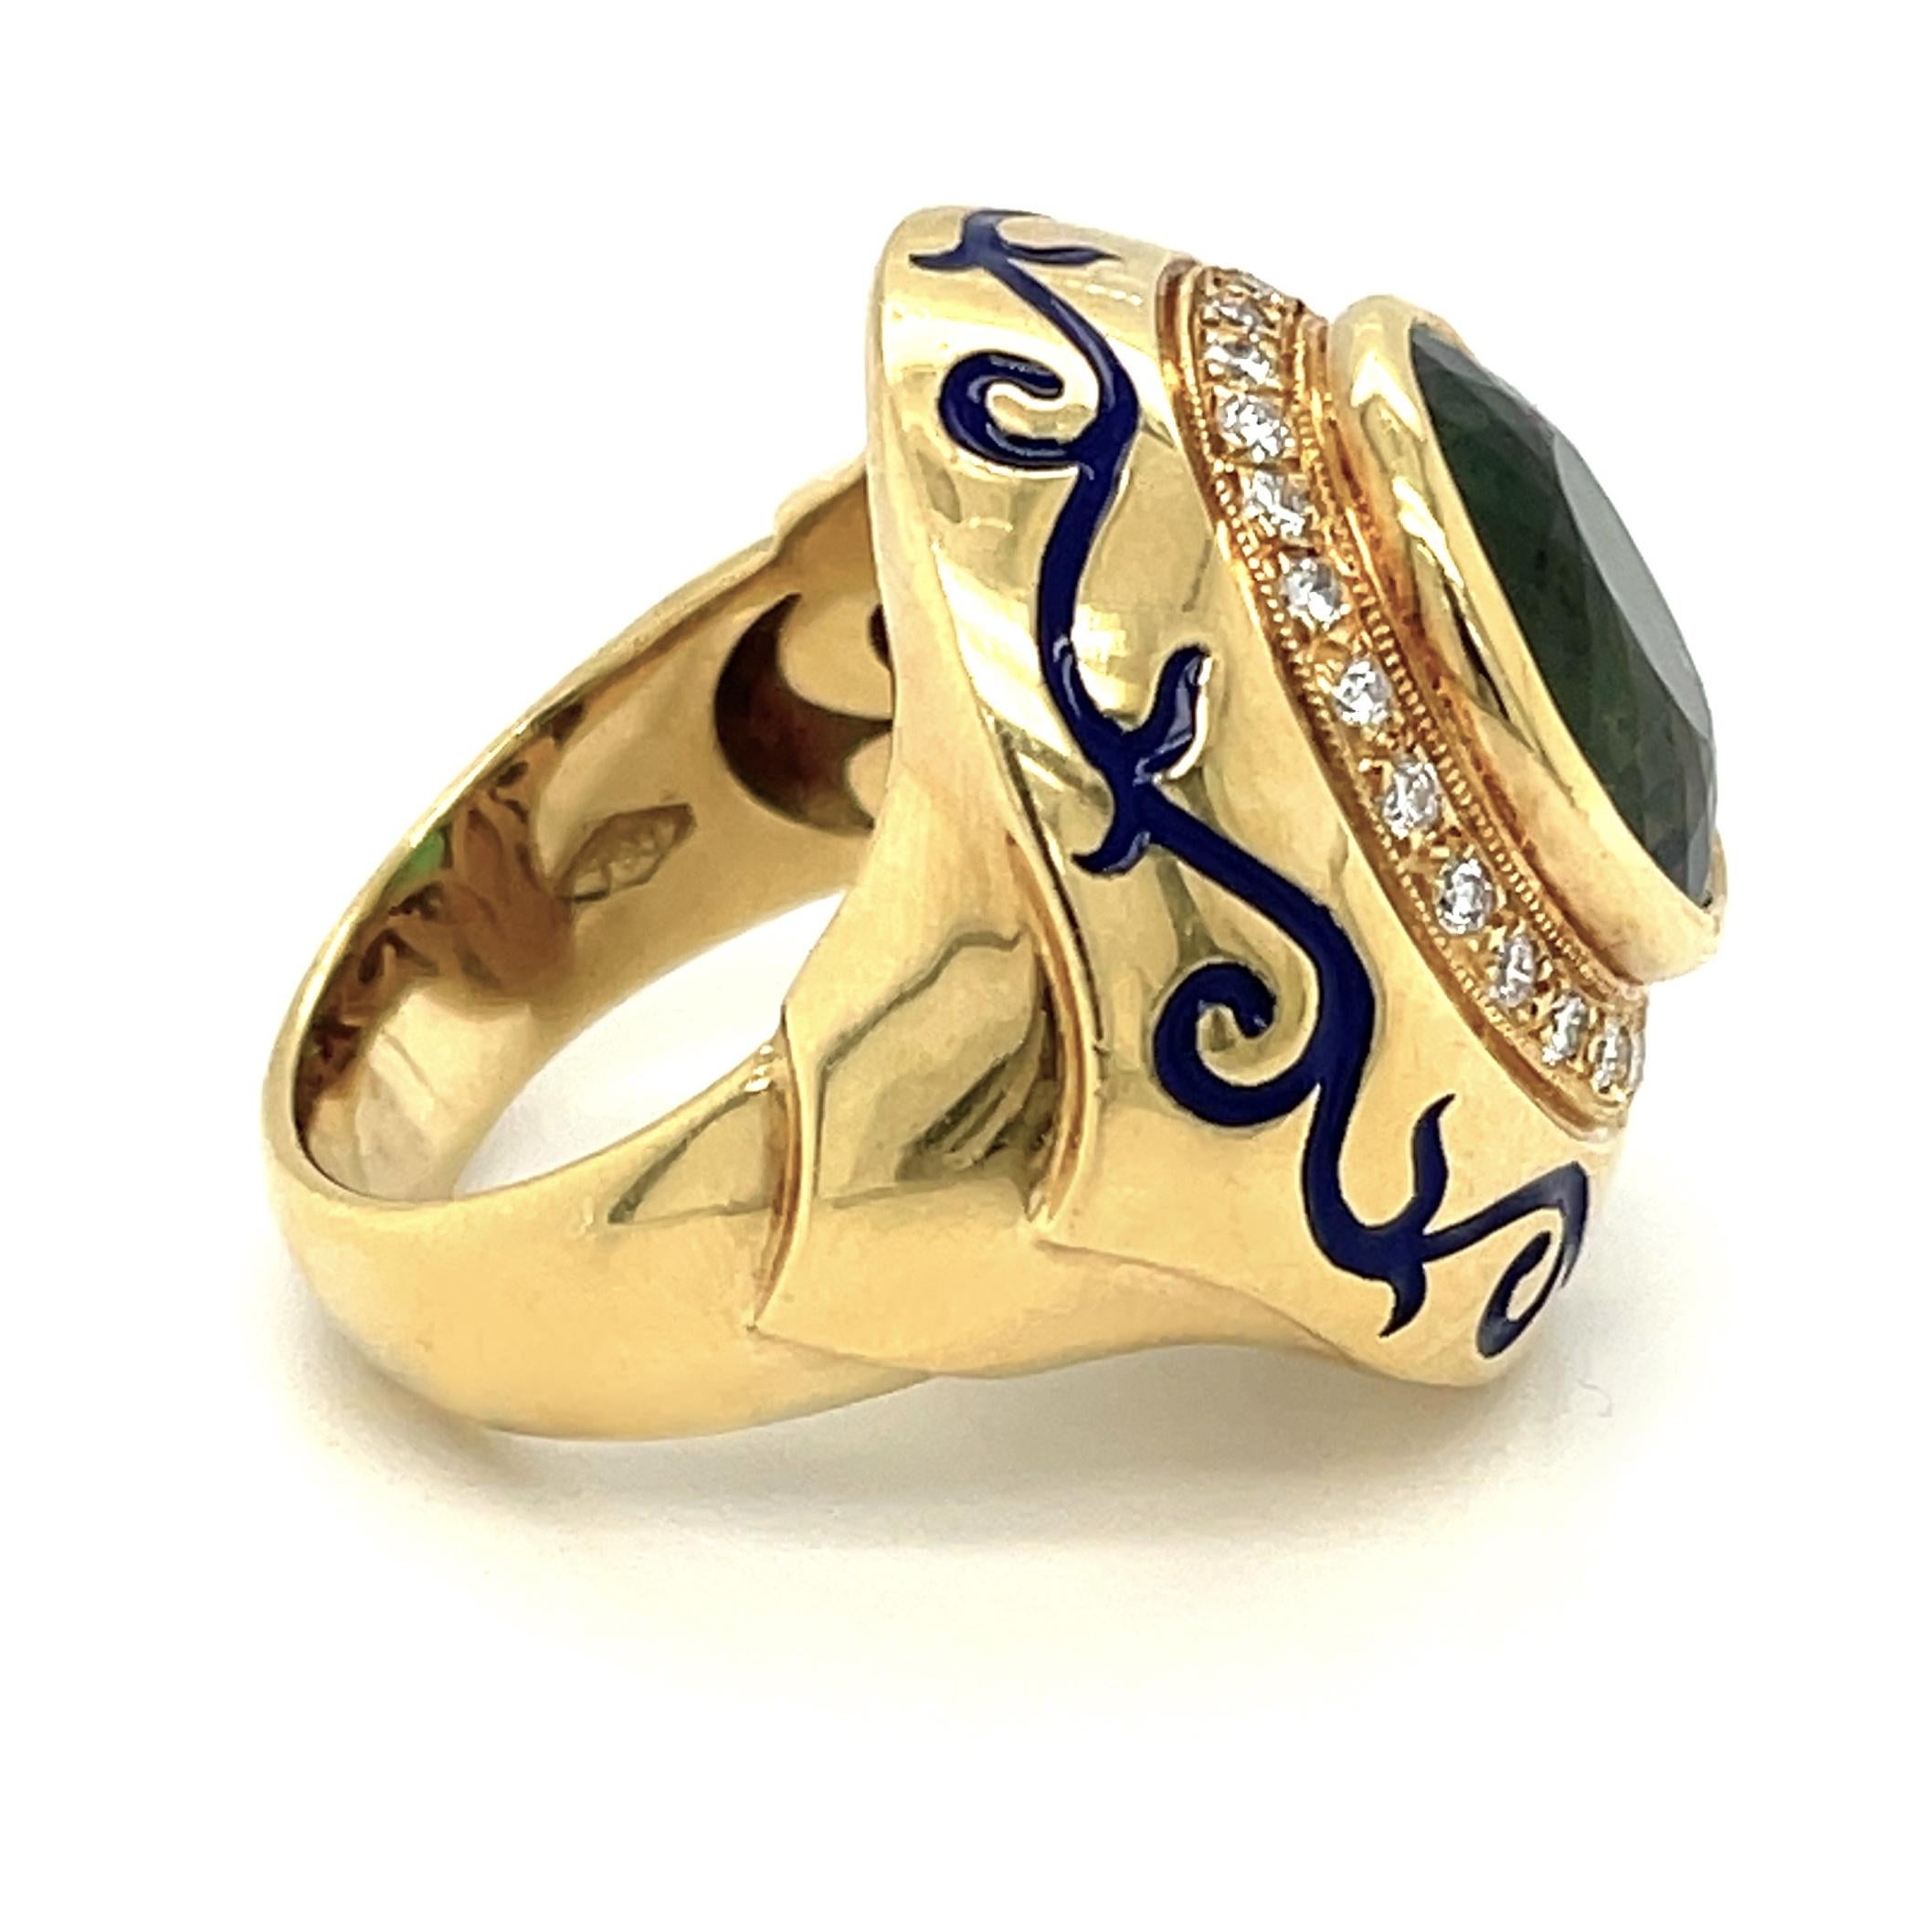 This impressive statement ring features a spectacular 7.88 carat faceted green tourmaline with gorgeous color and brilliance! The center gemstone is a beautiful bright green oval with bluish green and yellowish green highlights that sparkle